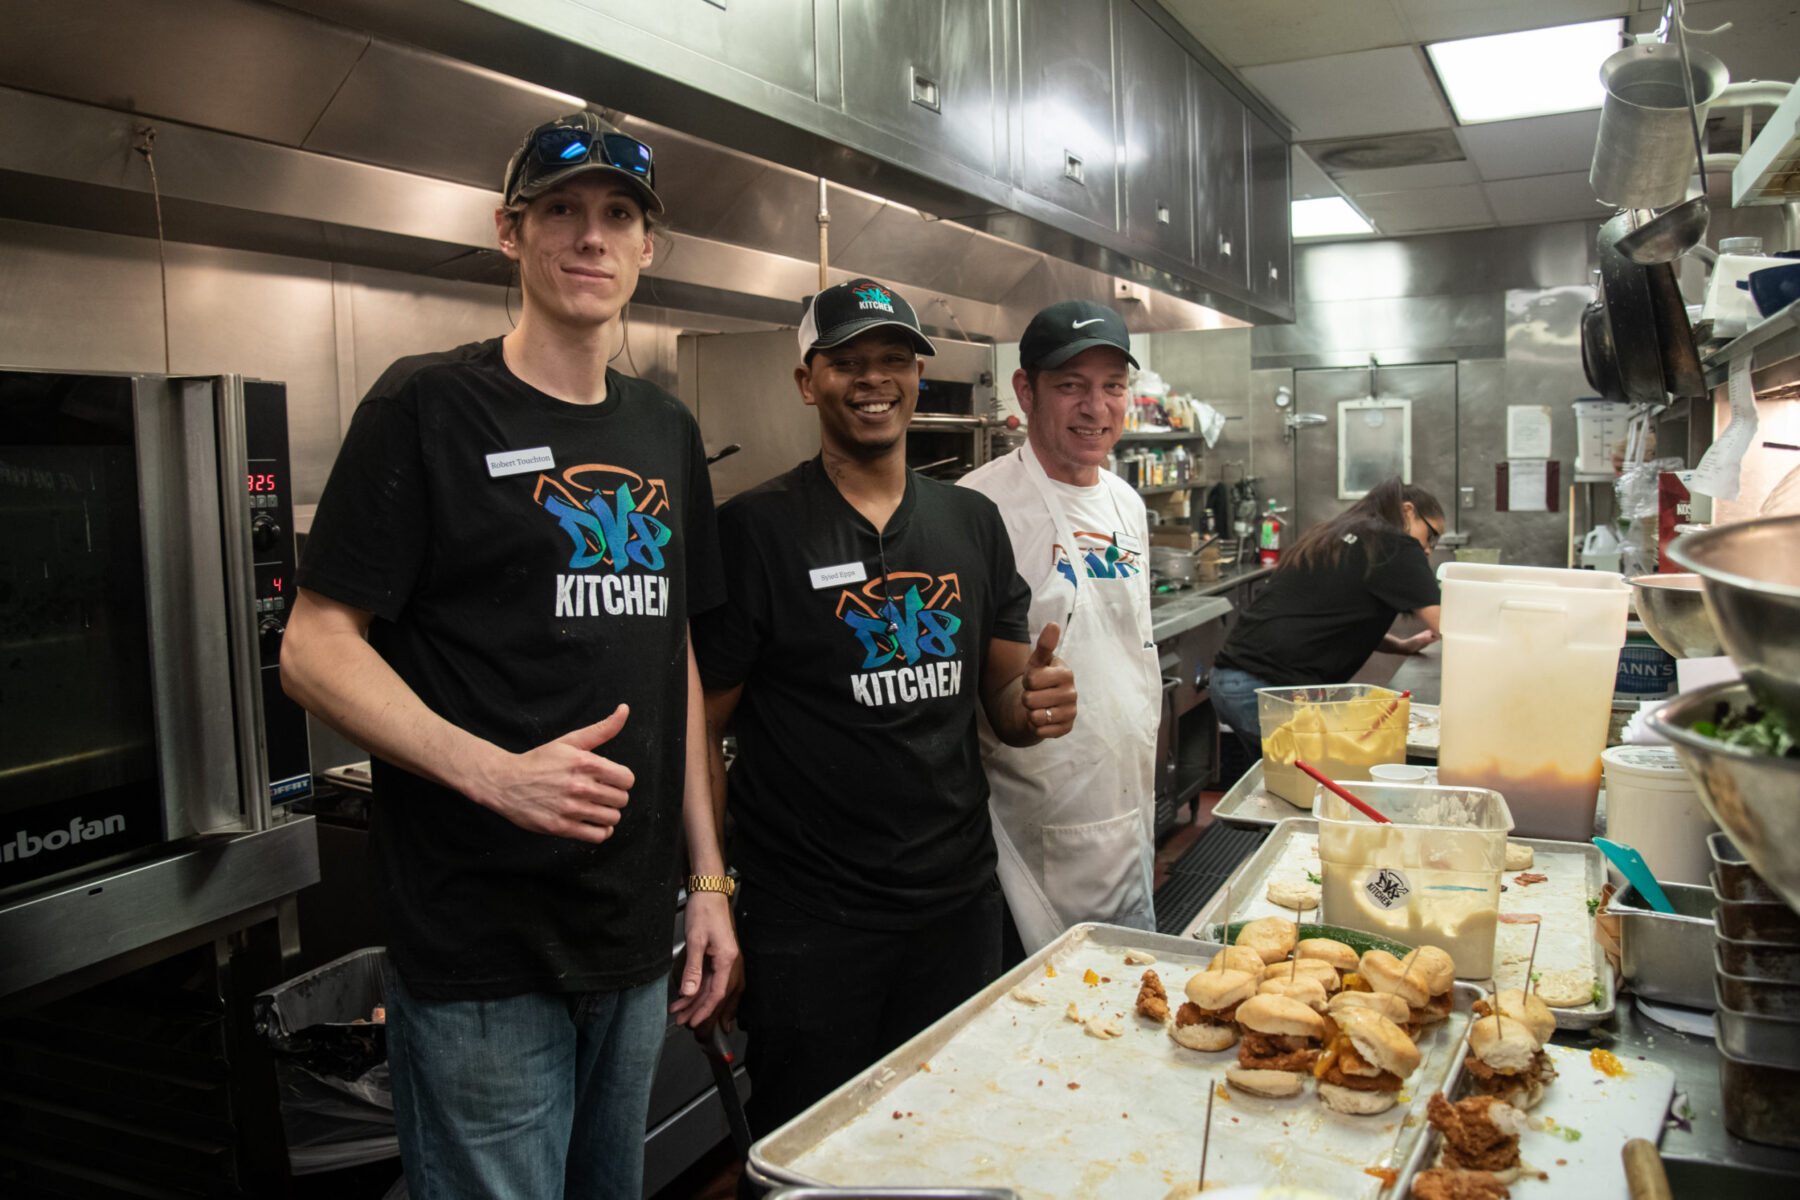 Three chefs smiling in a busy kitchen, wearing 'DV8 Kitchen' shirts.